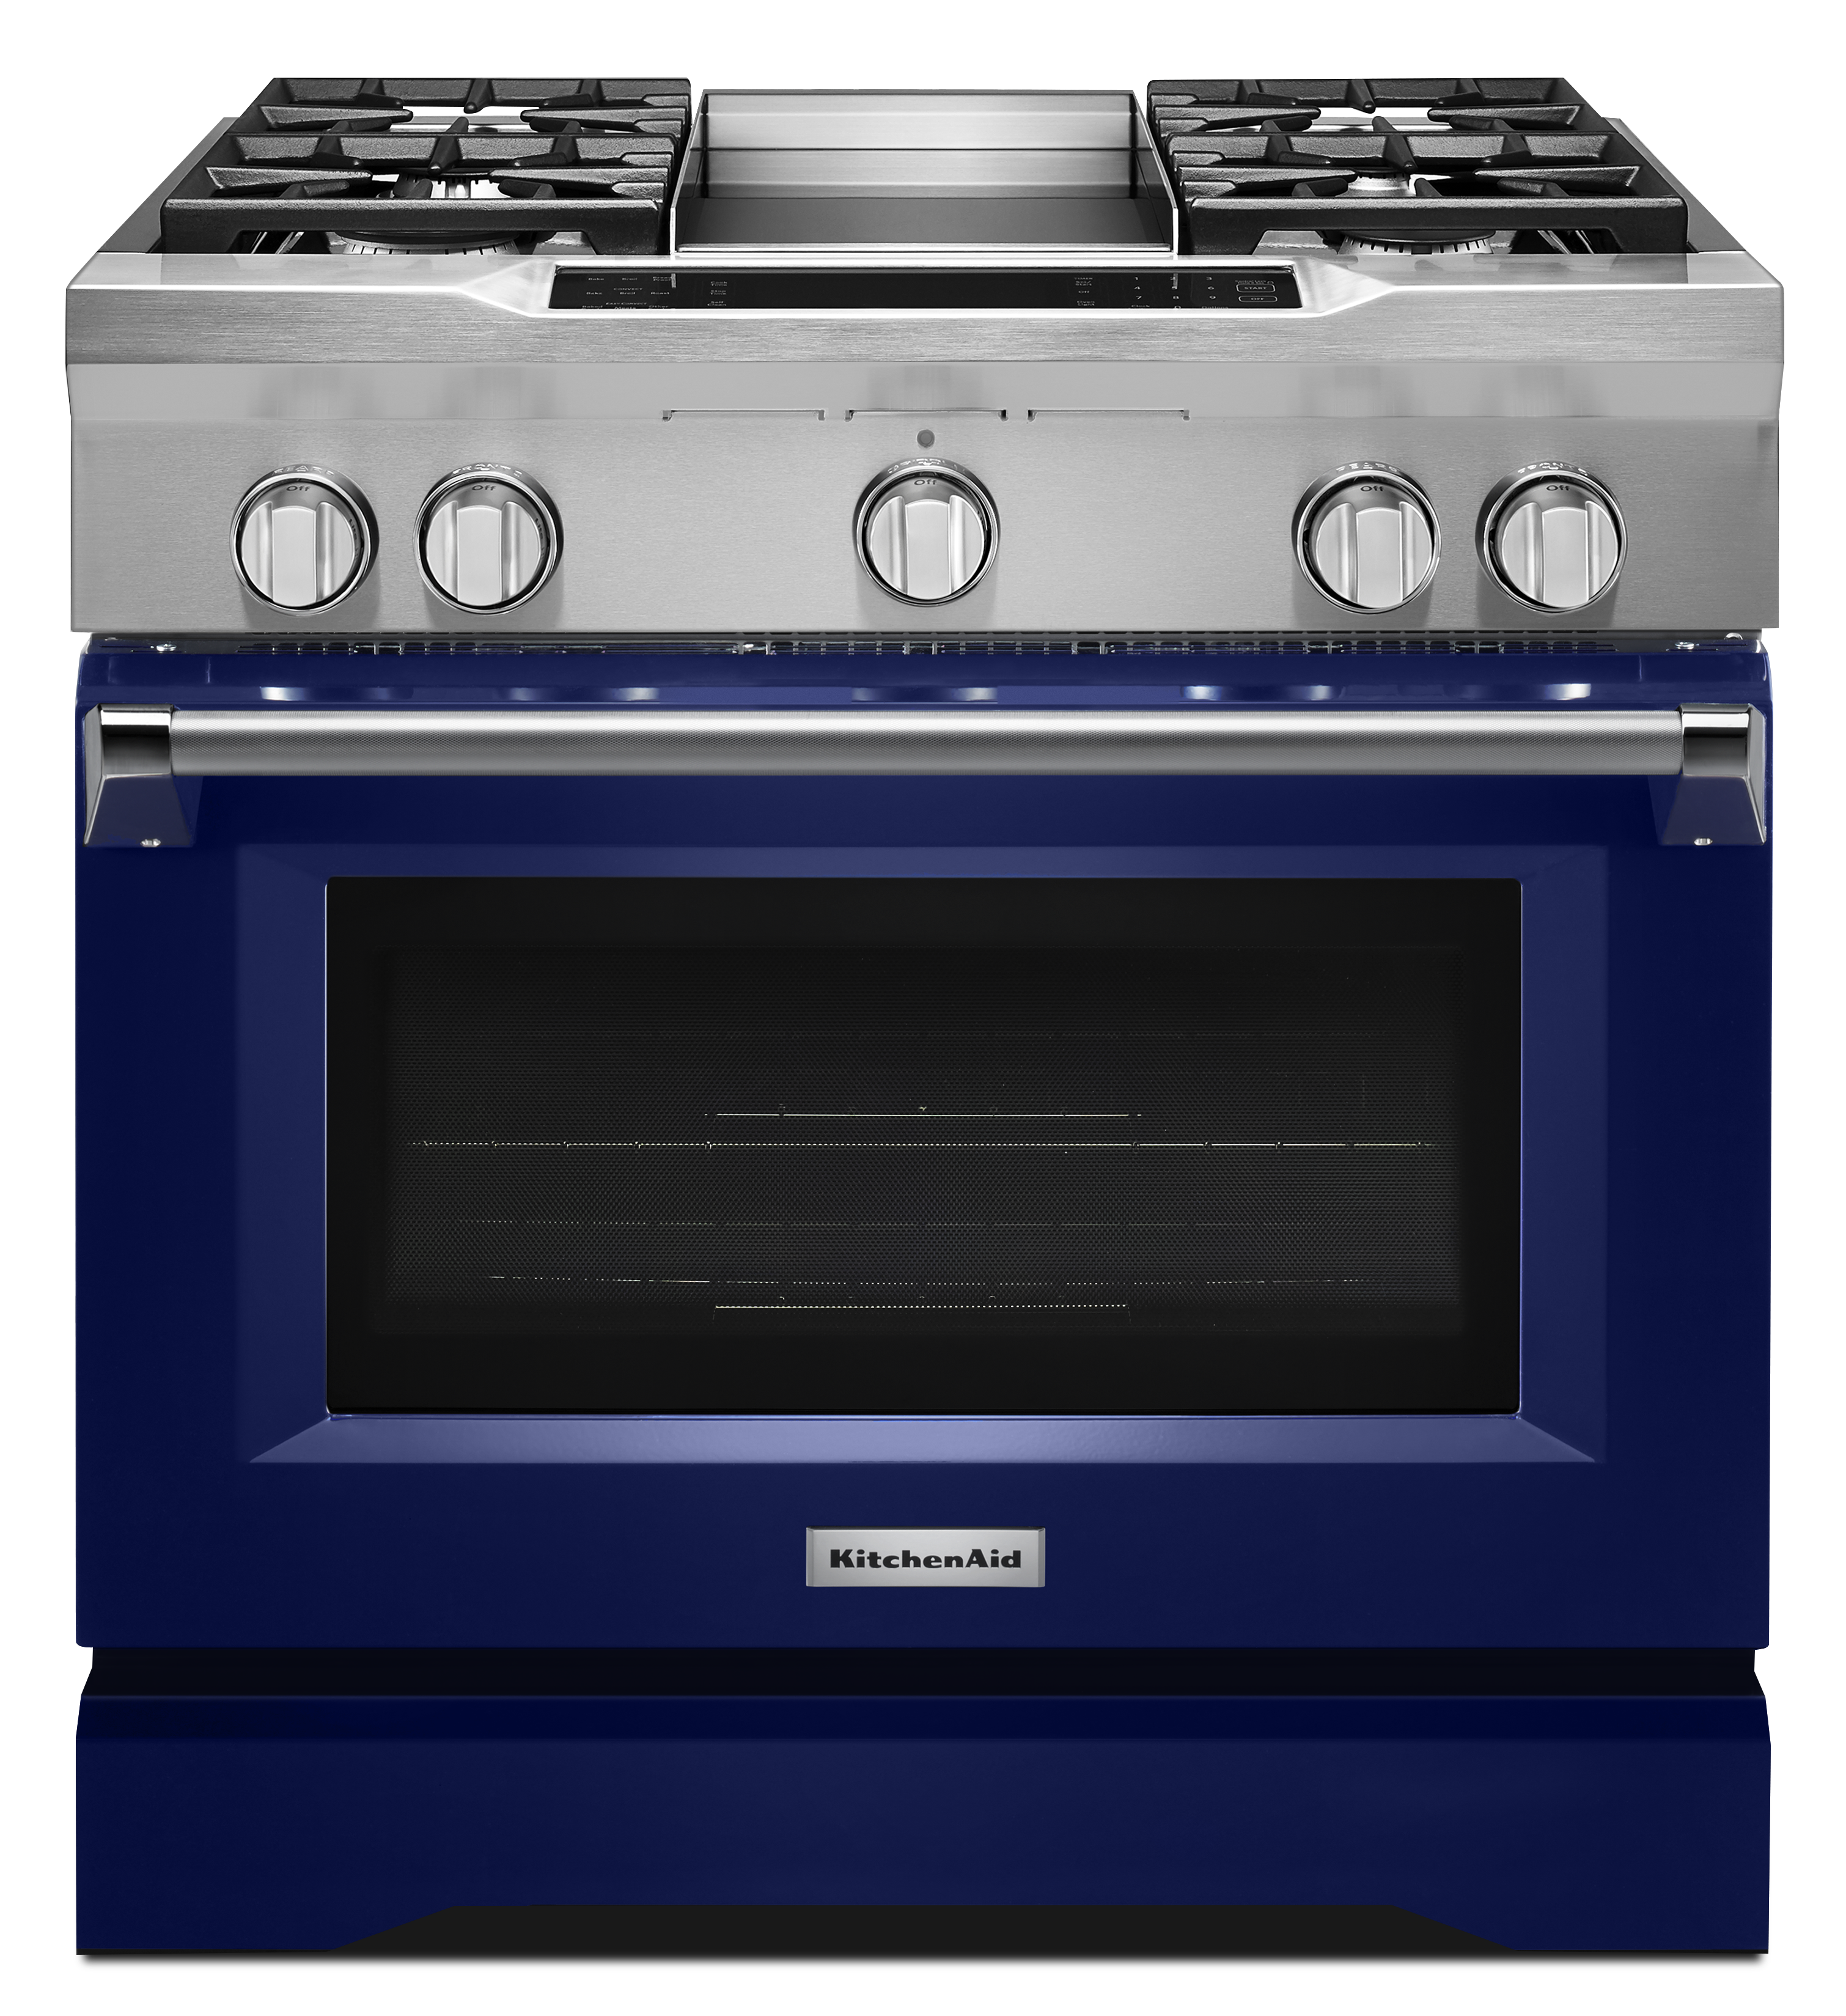 Electric Fireplace Logs Lowes Beautiful Deep Recessed 5 Burner Self Cleaning Convection Single Oven Dual Fuel Range Cobalt Blue Mon 36 Inch Actual 36 In